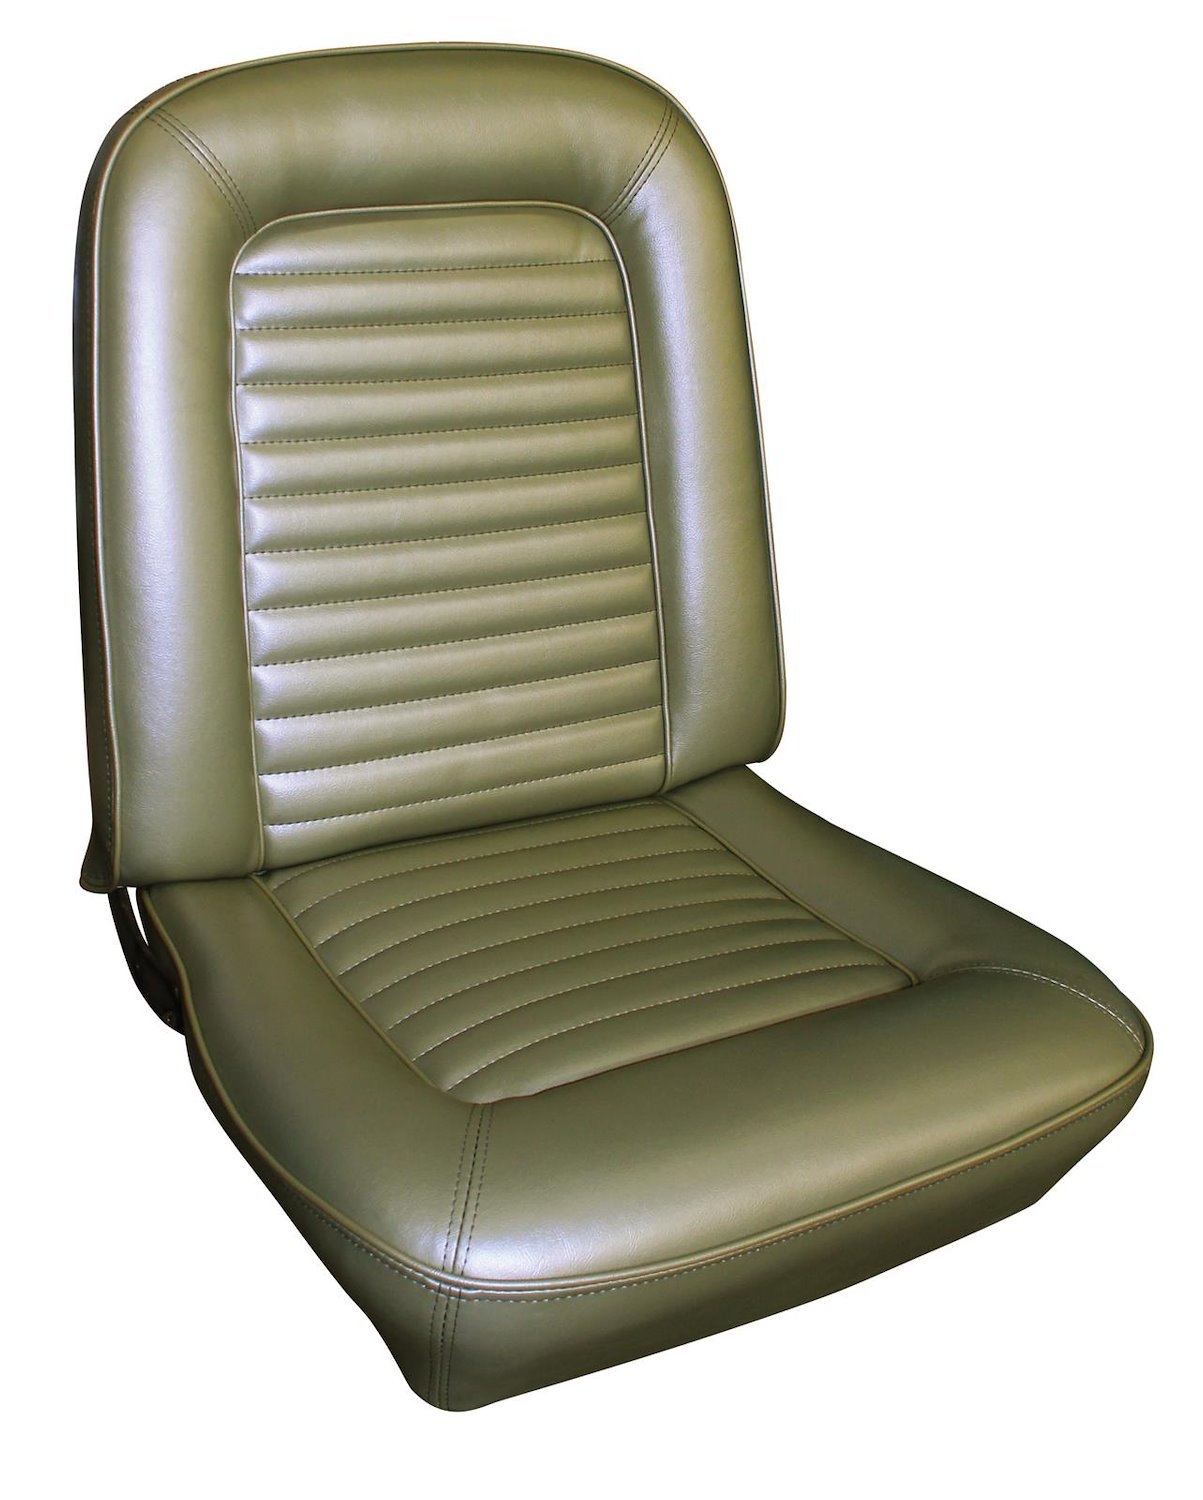 1968 Ford Mustang Fastback Deluxe Comfortweave Interior Front Bucket and Rear Bench Seat Upholstery Set